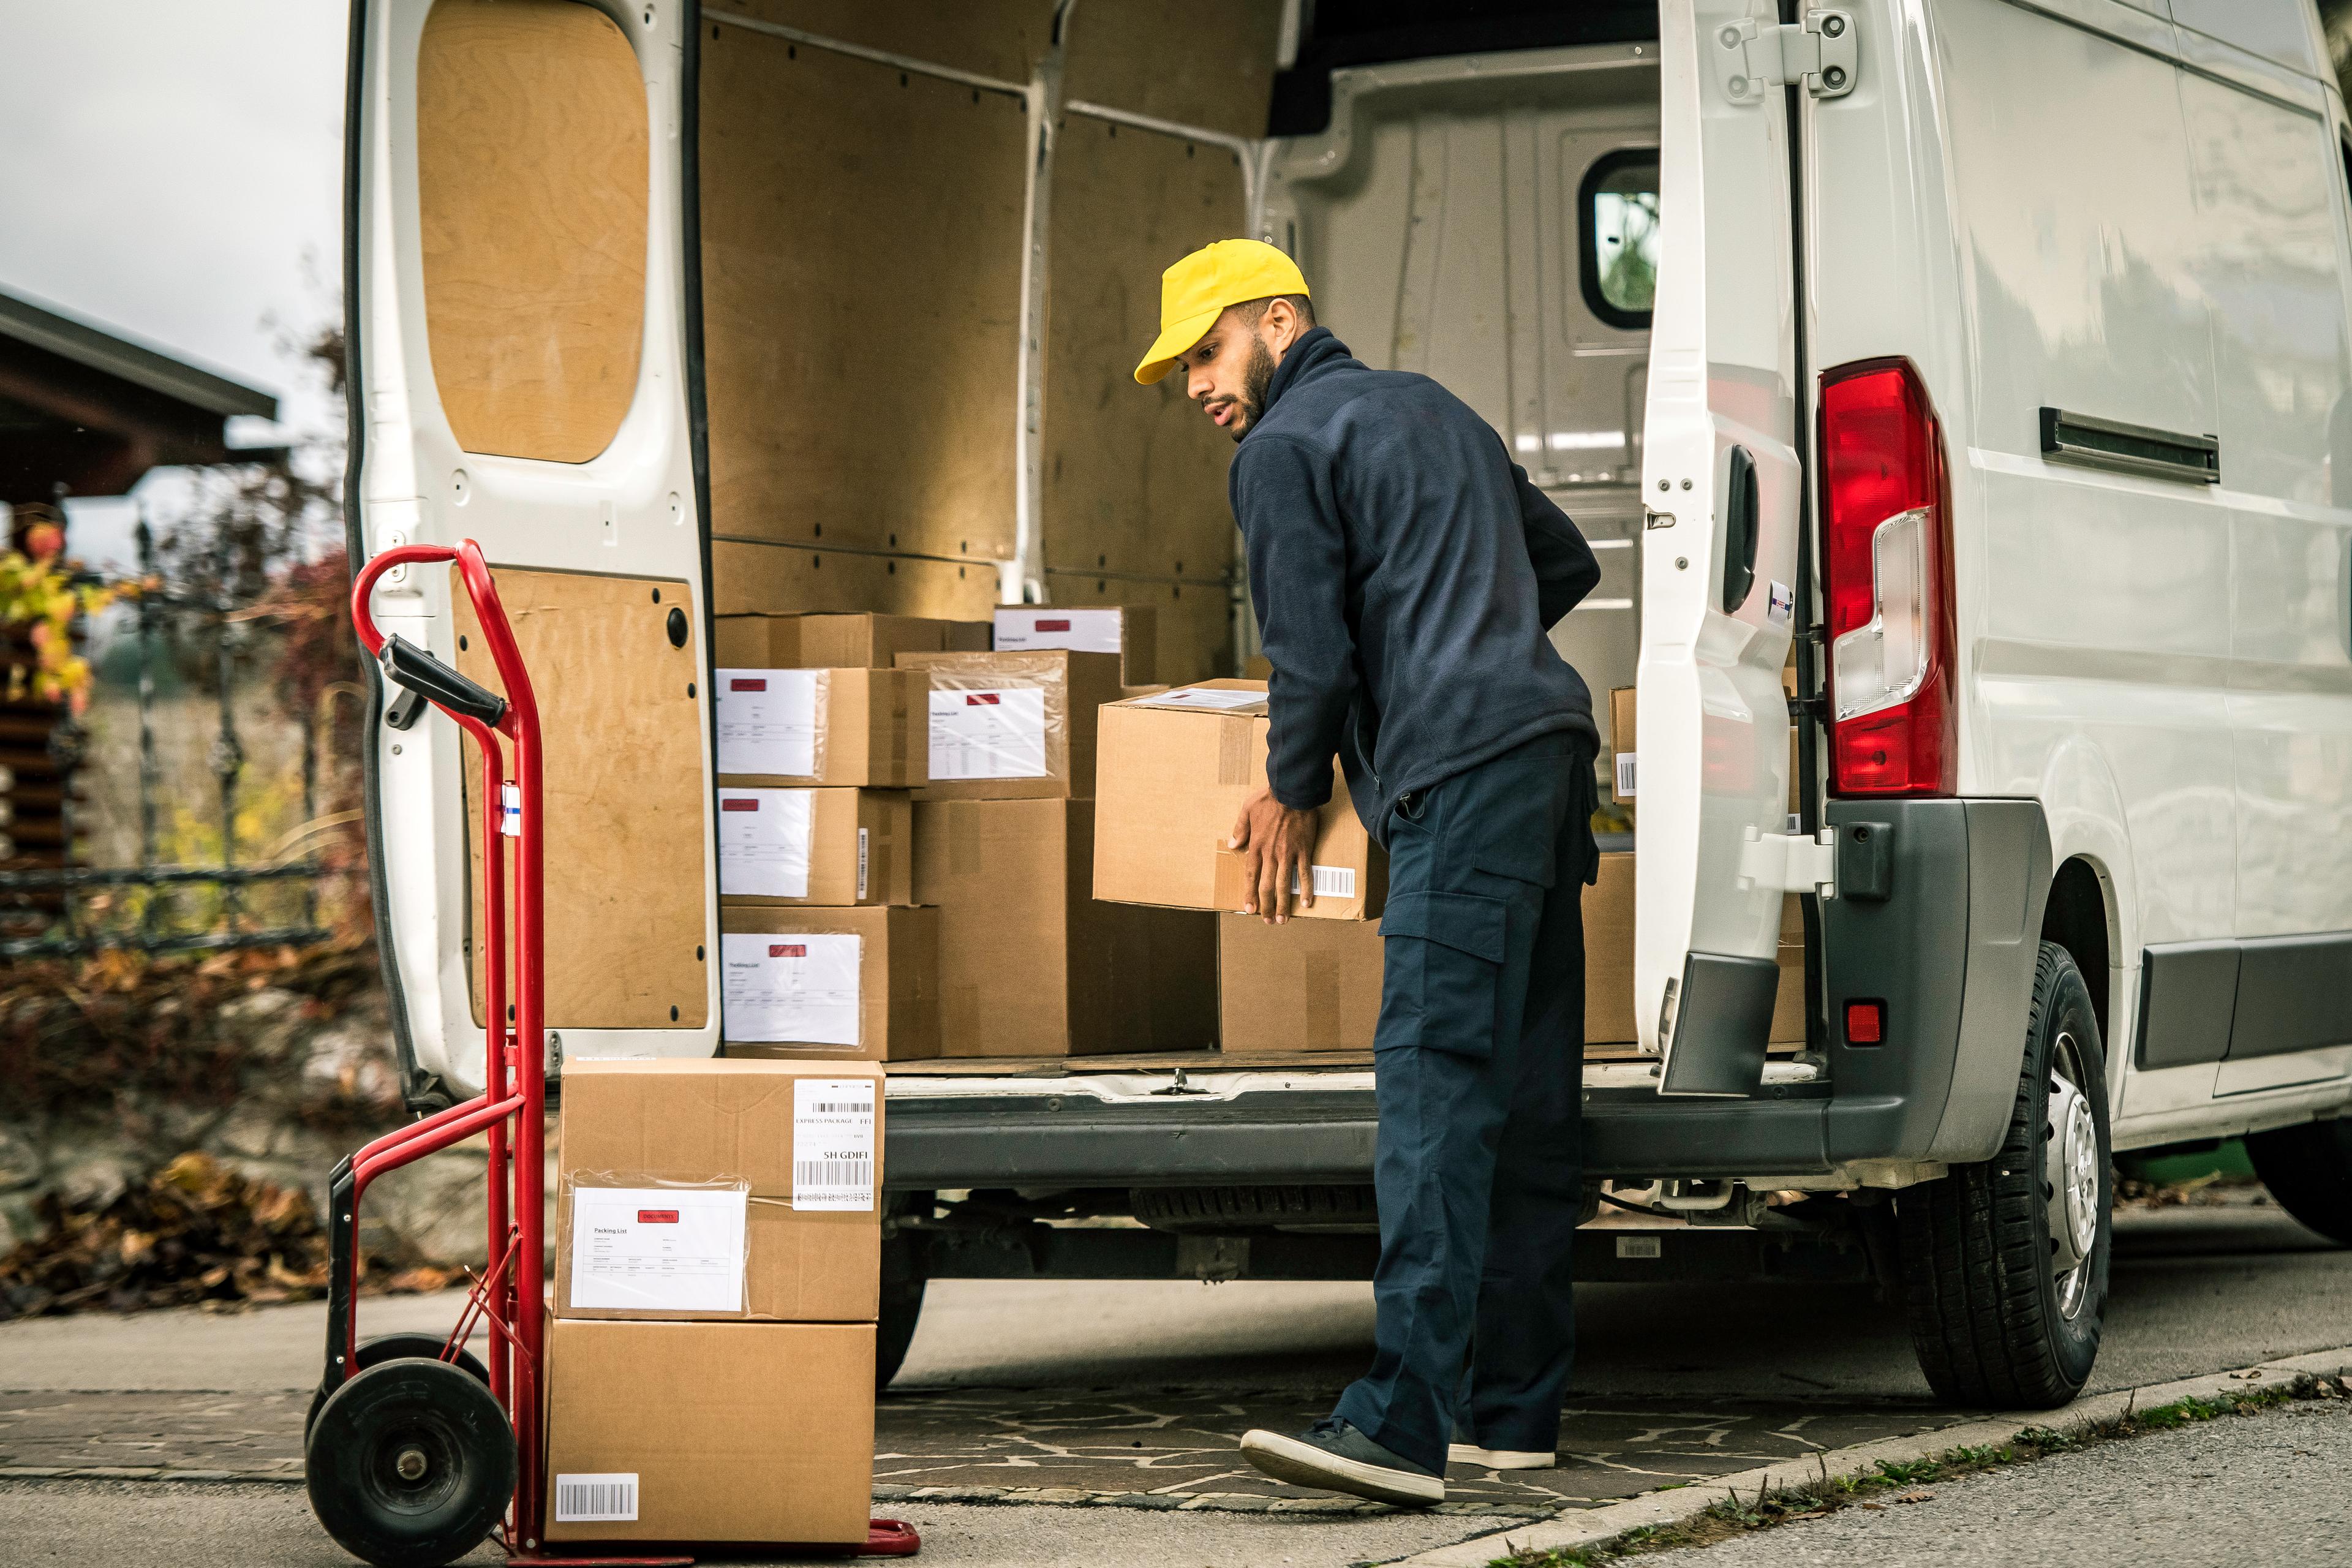 5 reasons to consider Zego's courier van insurance